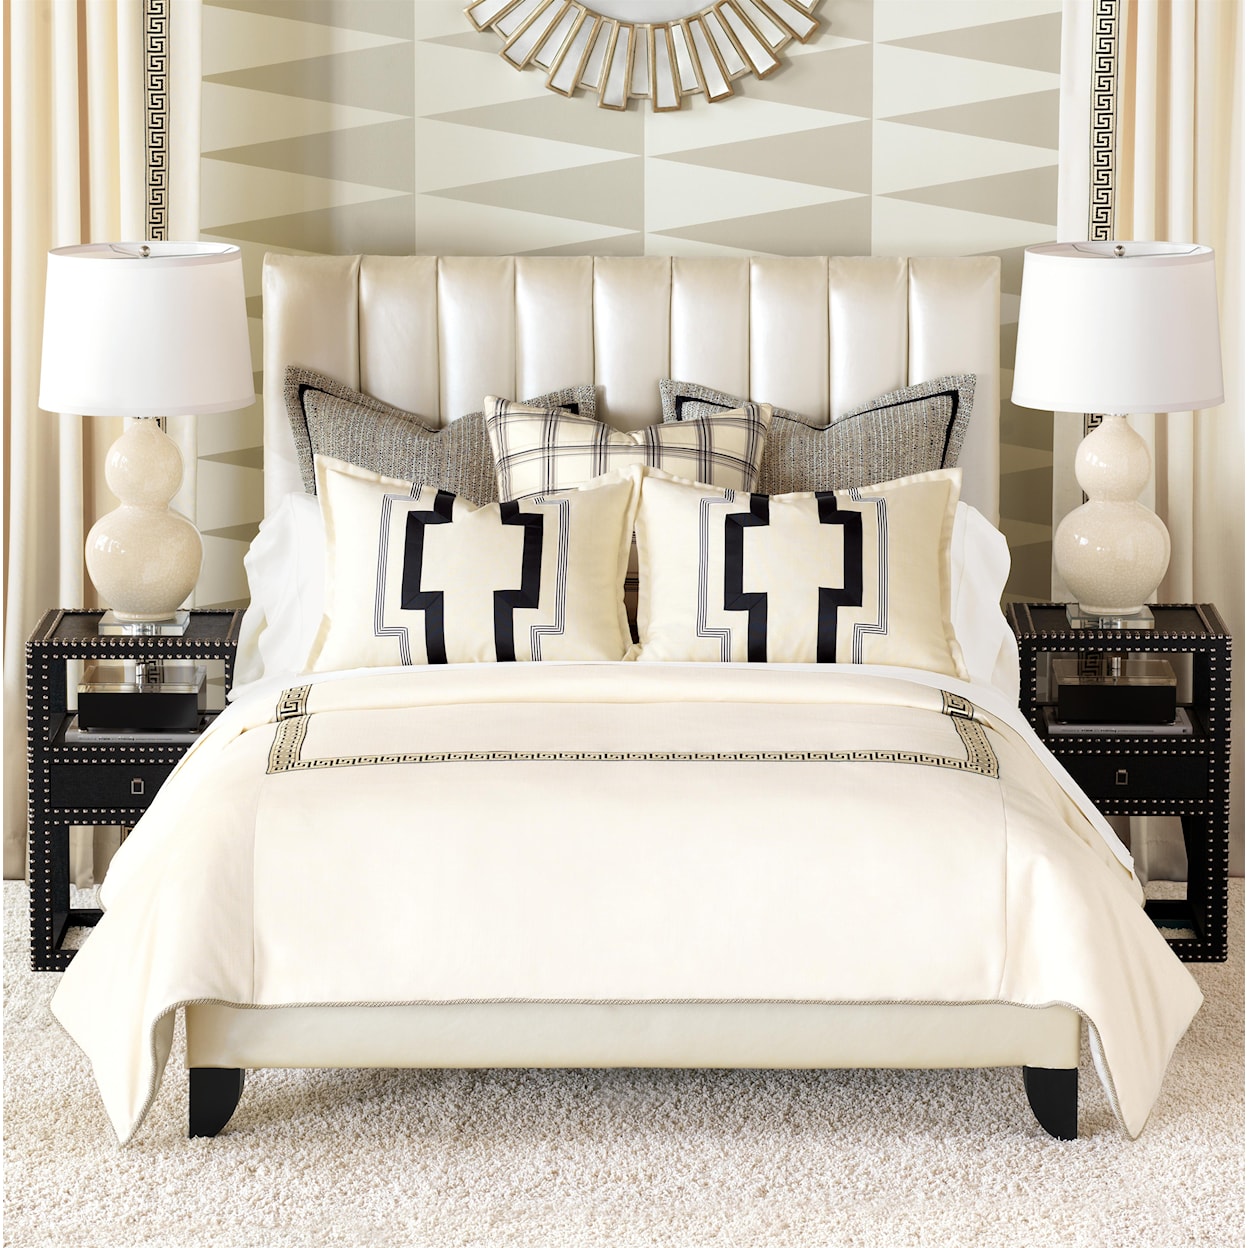 Eastern Accents Abernathy King Button-Tufted Comforter